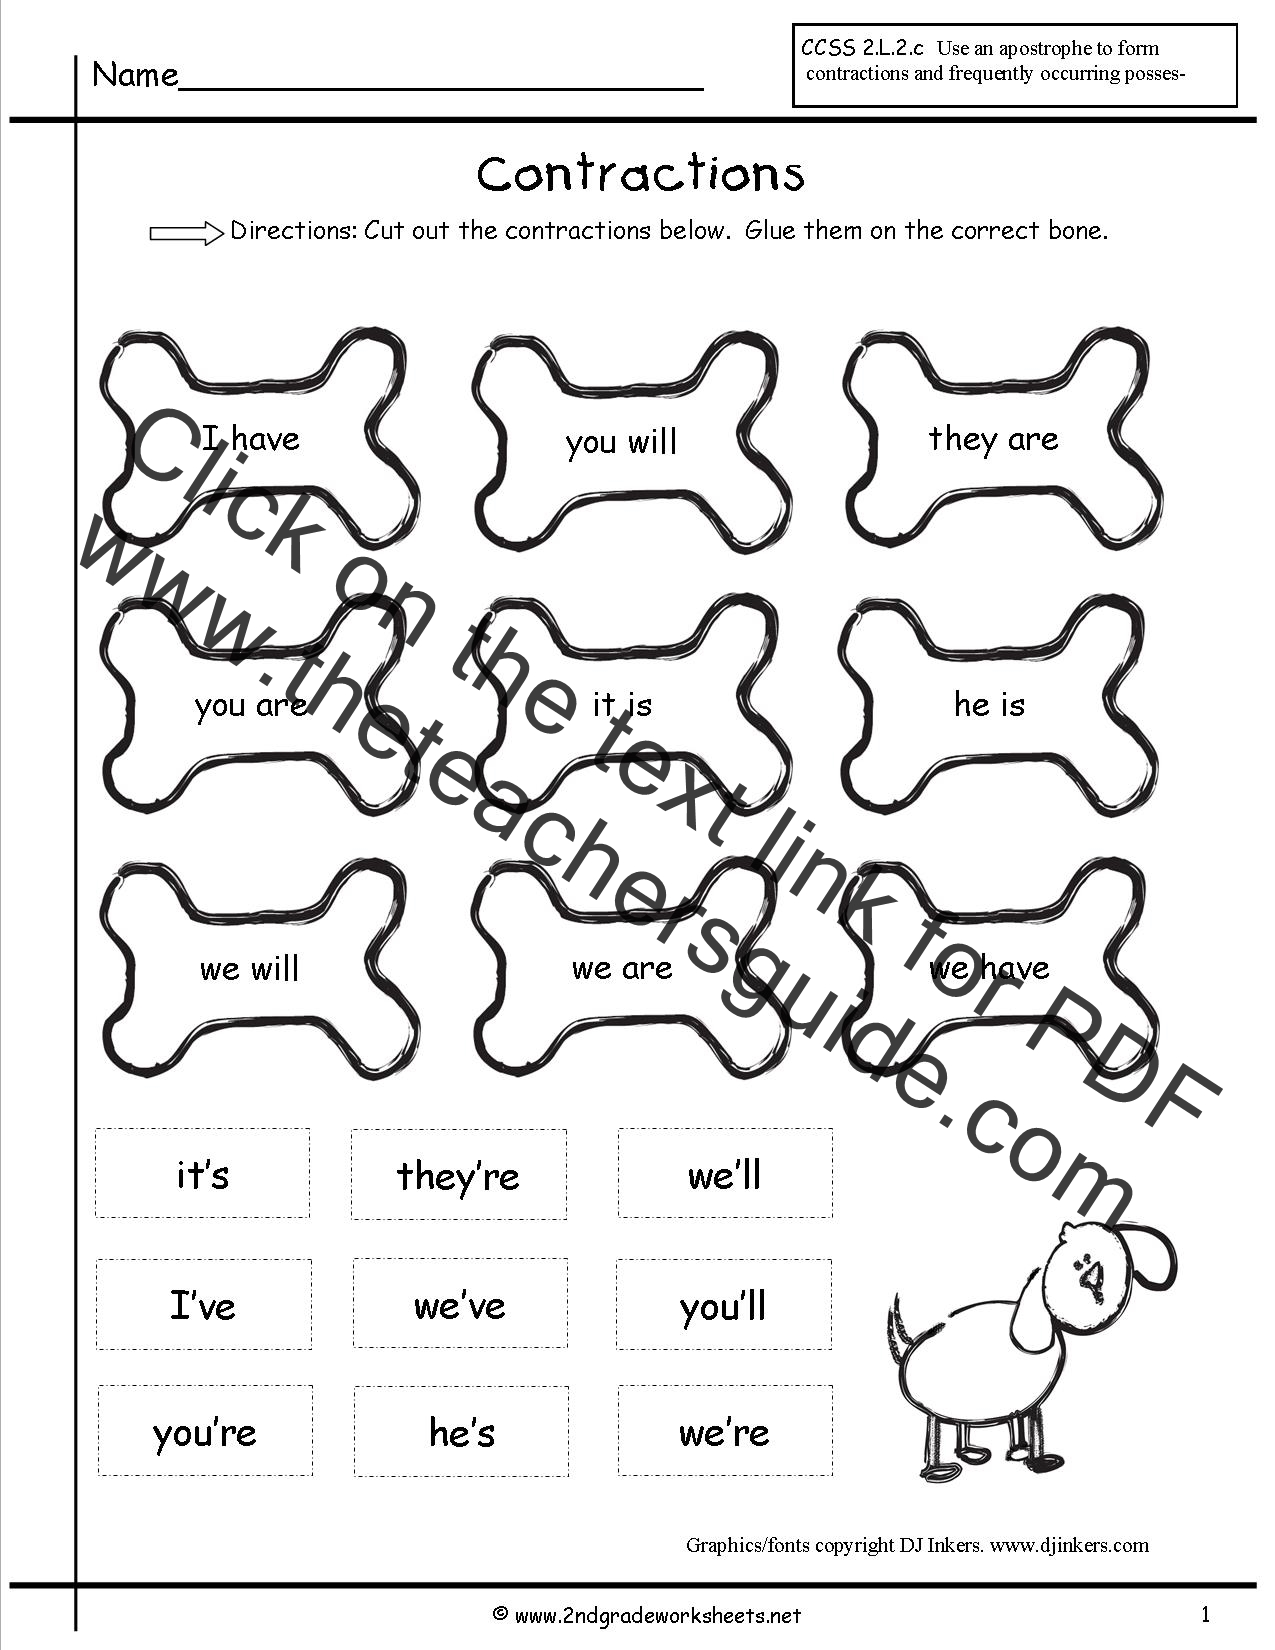 Free Contractions Worksheets and Printouts Intended For Contractions Worksheet 2nd Grade